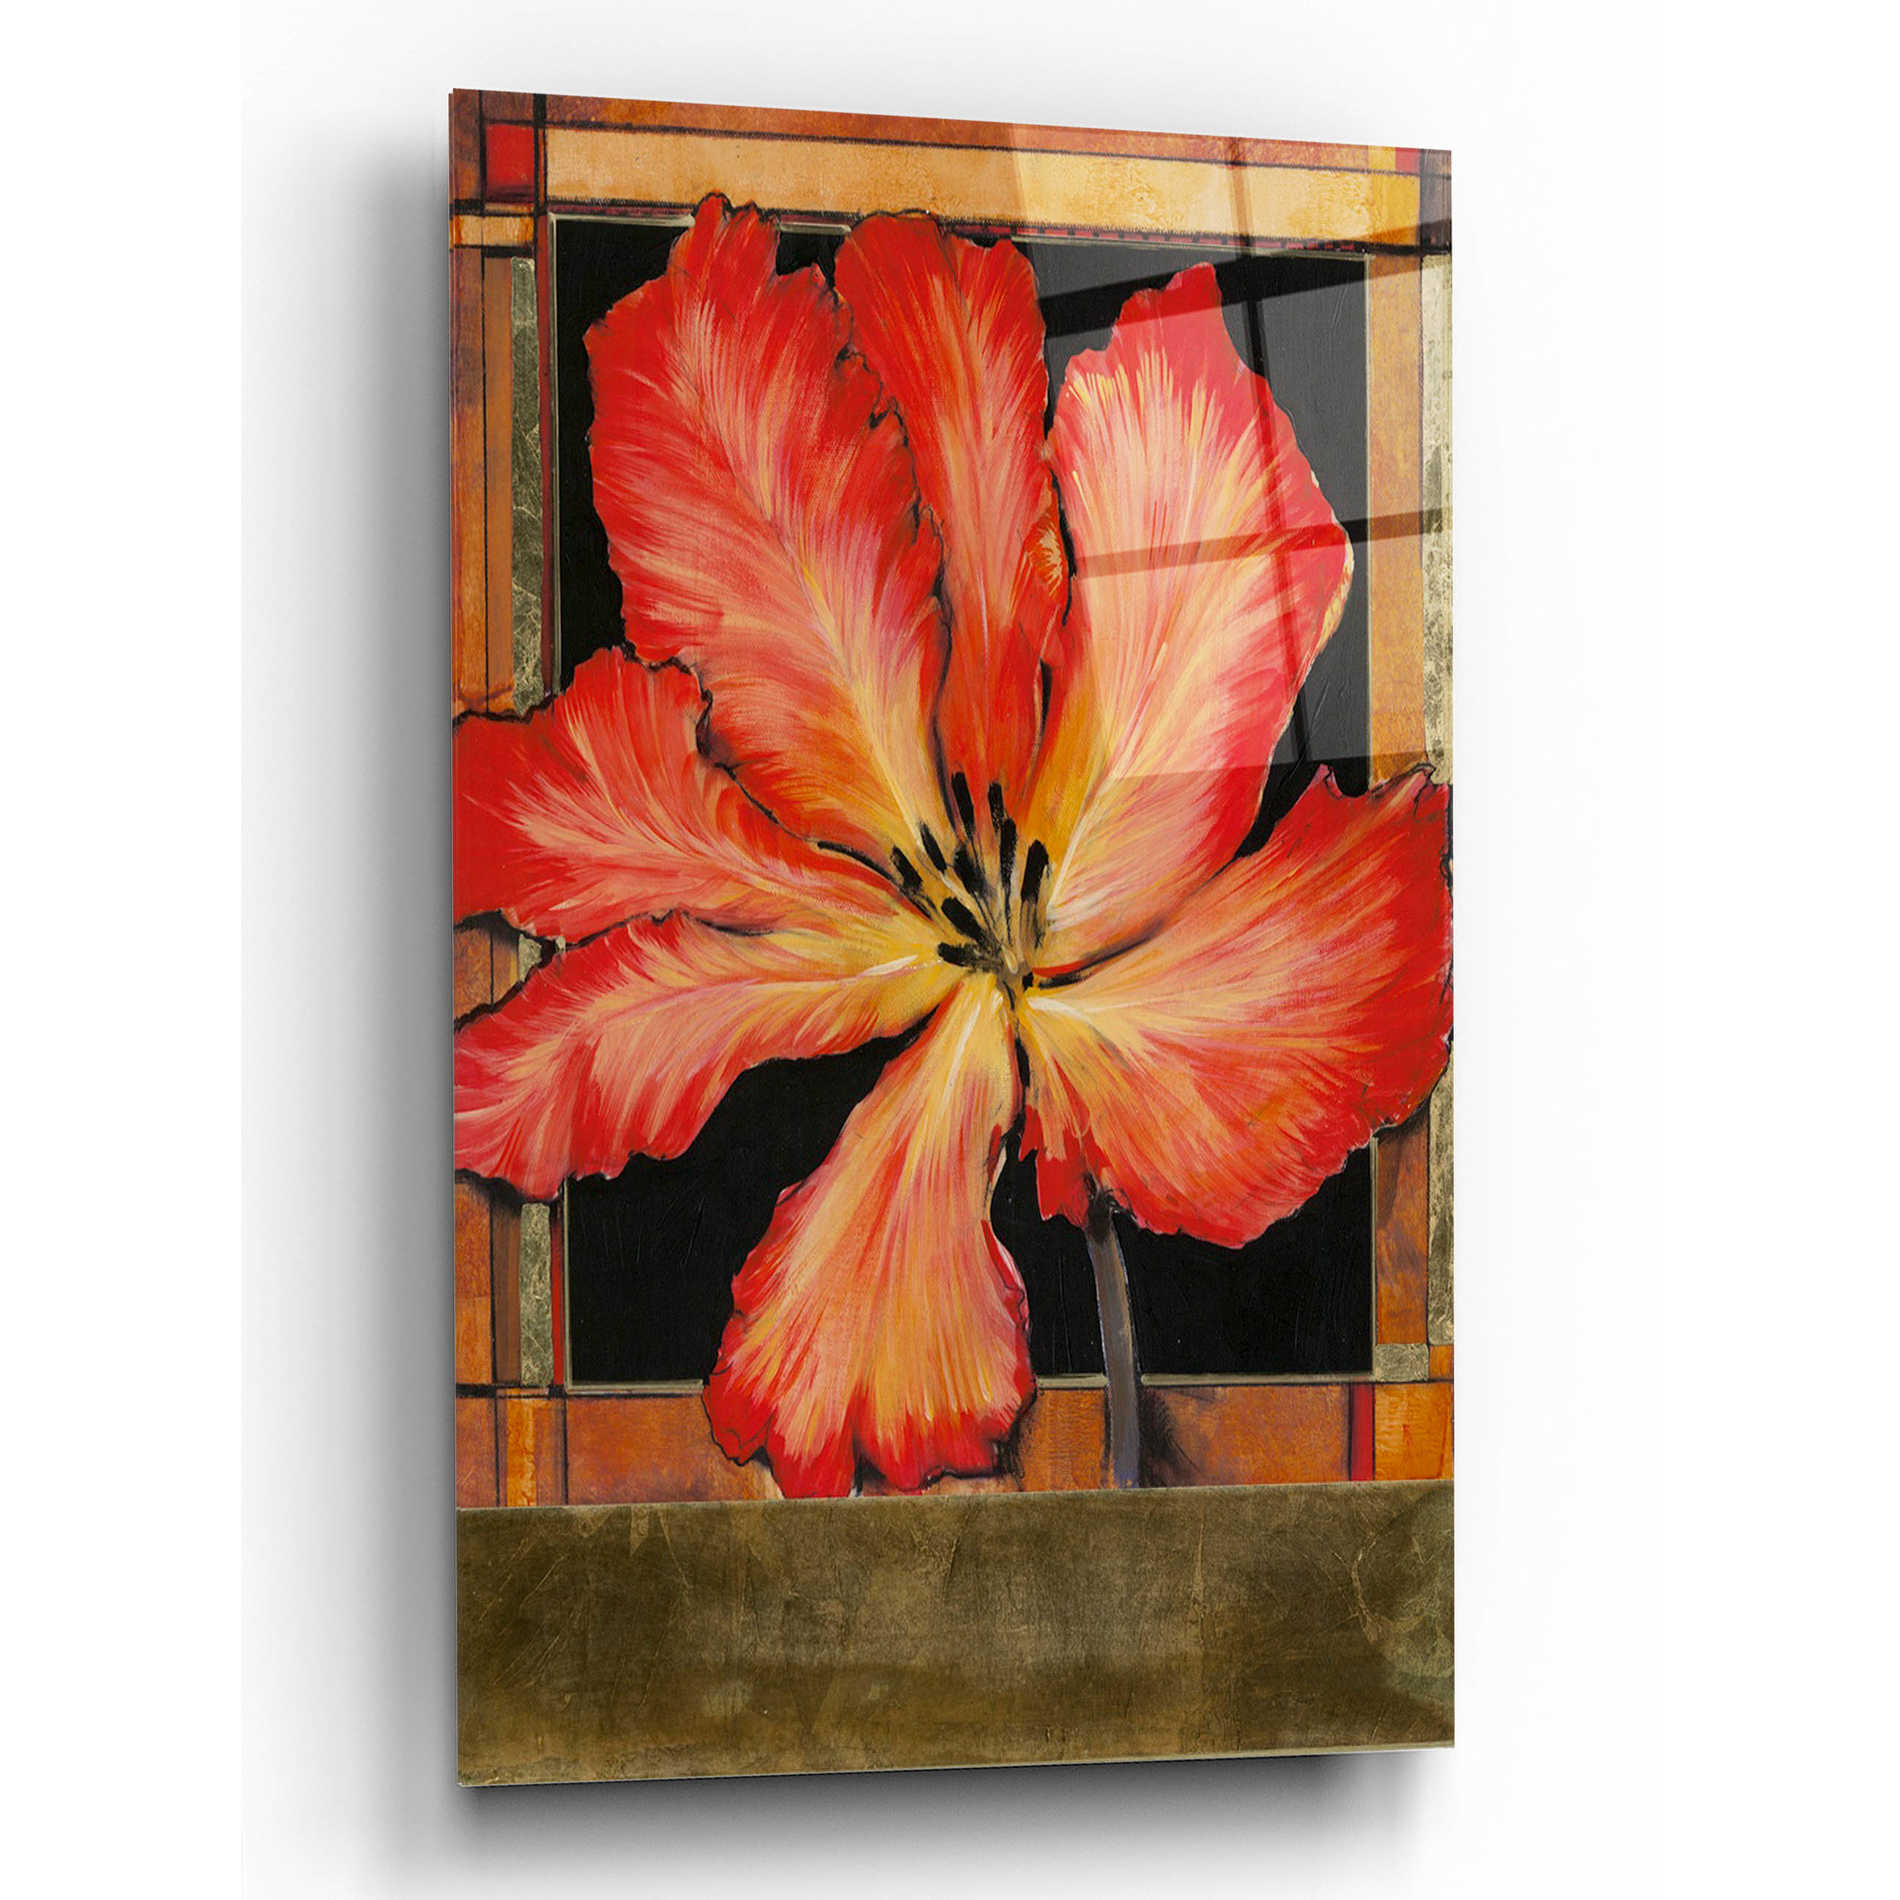 Epic Art 'Embellished Parrot Tulip I' by Tim O'Toole, Acrylic Glass Wall Art,16x24